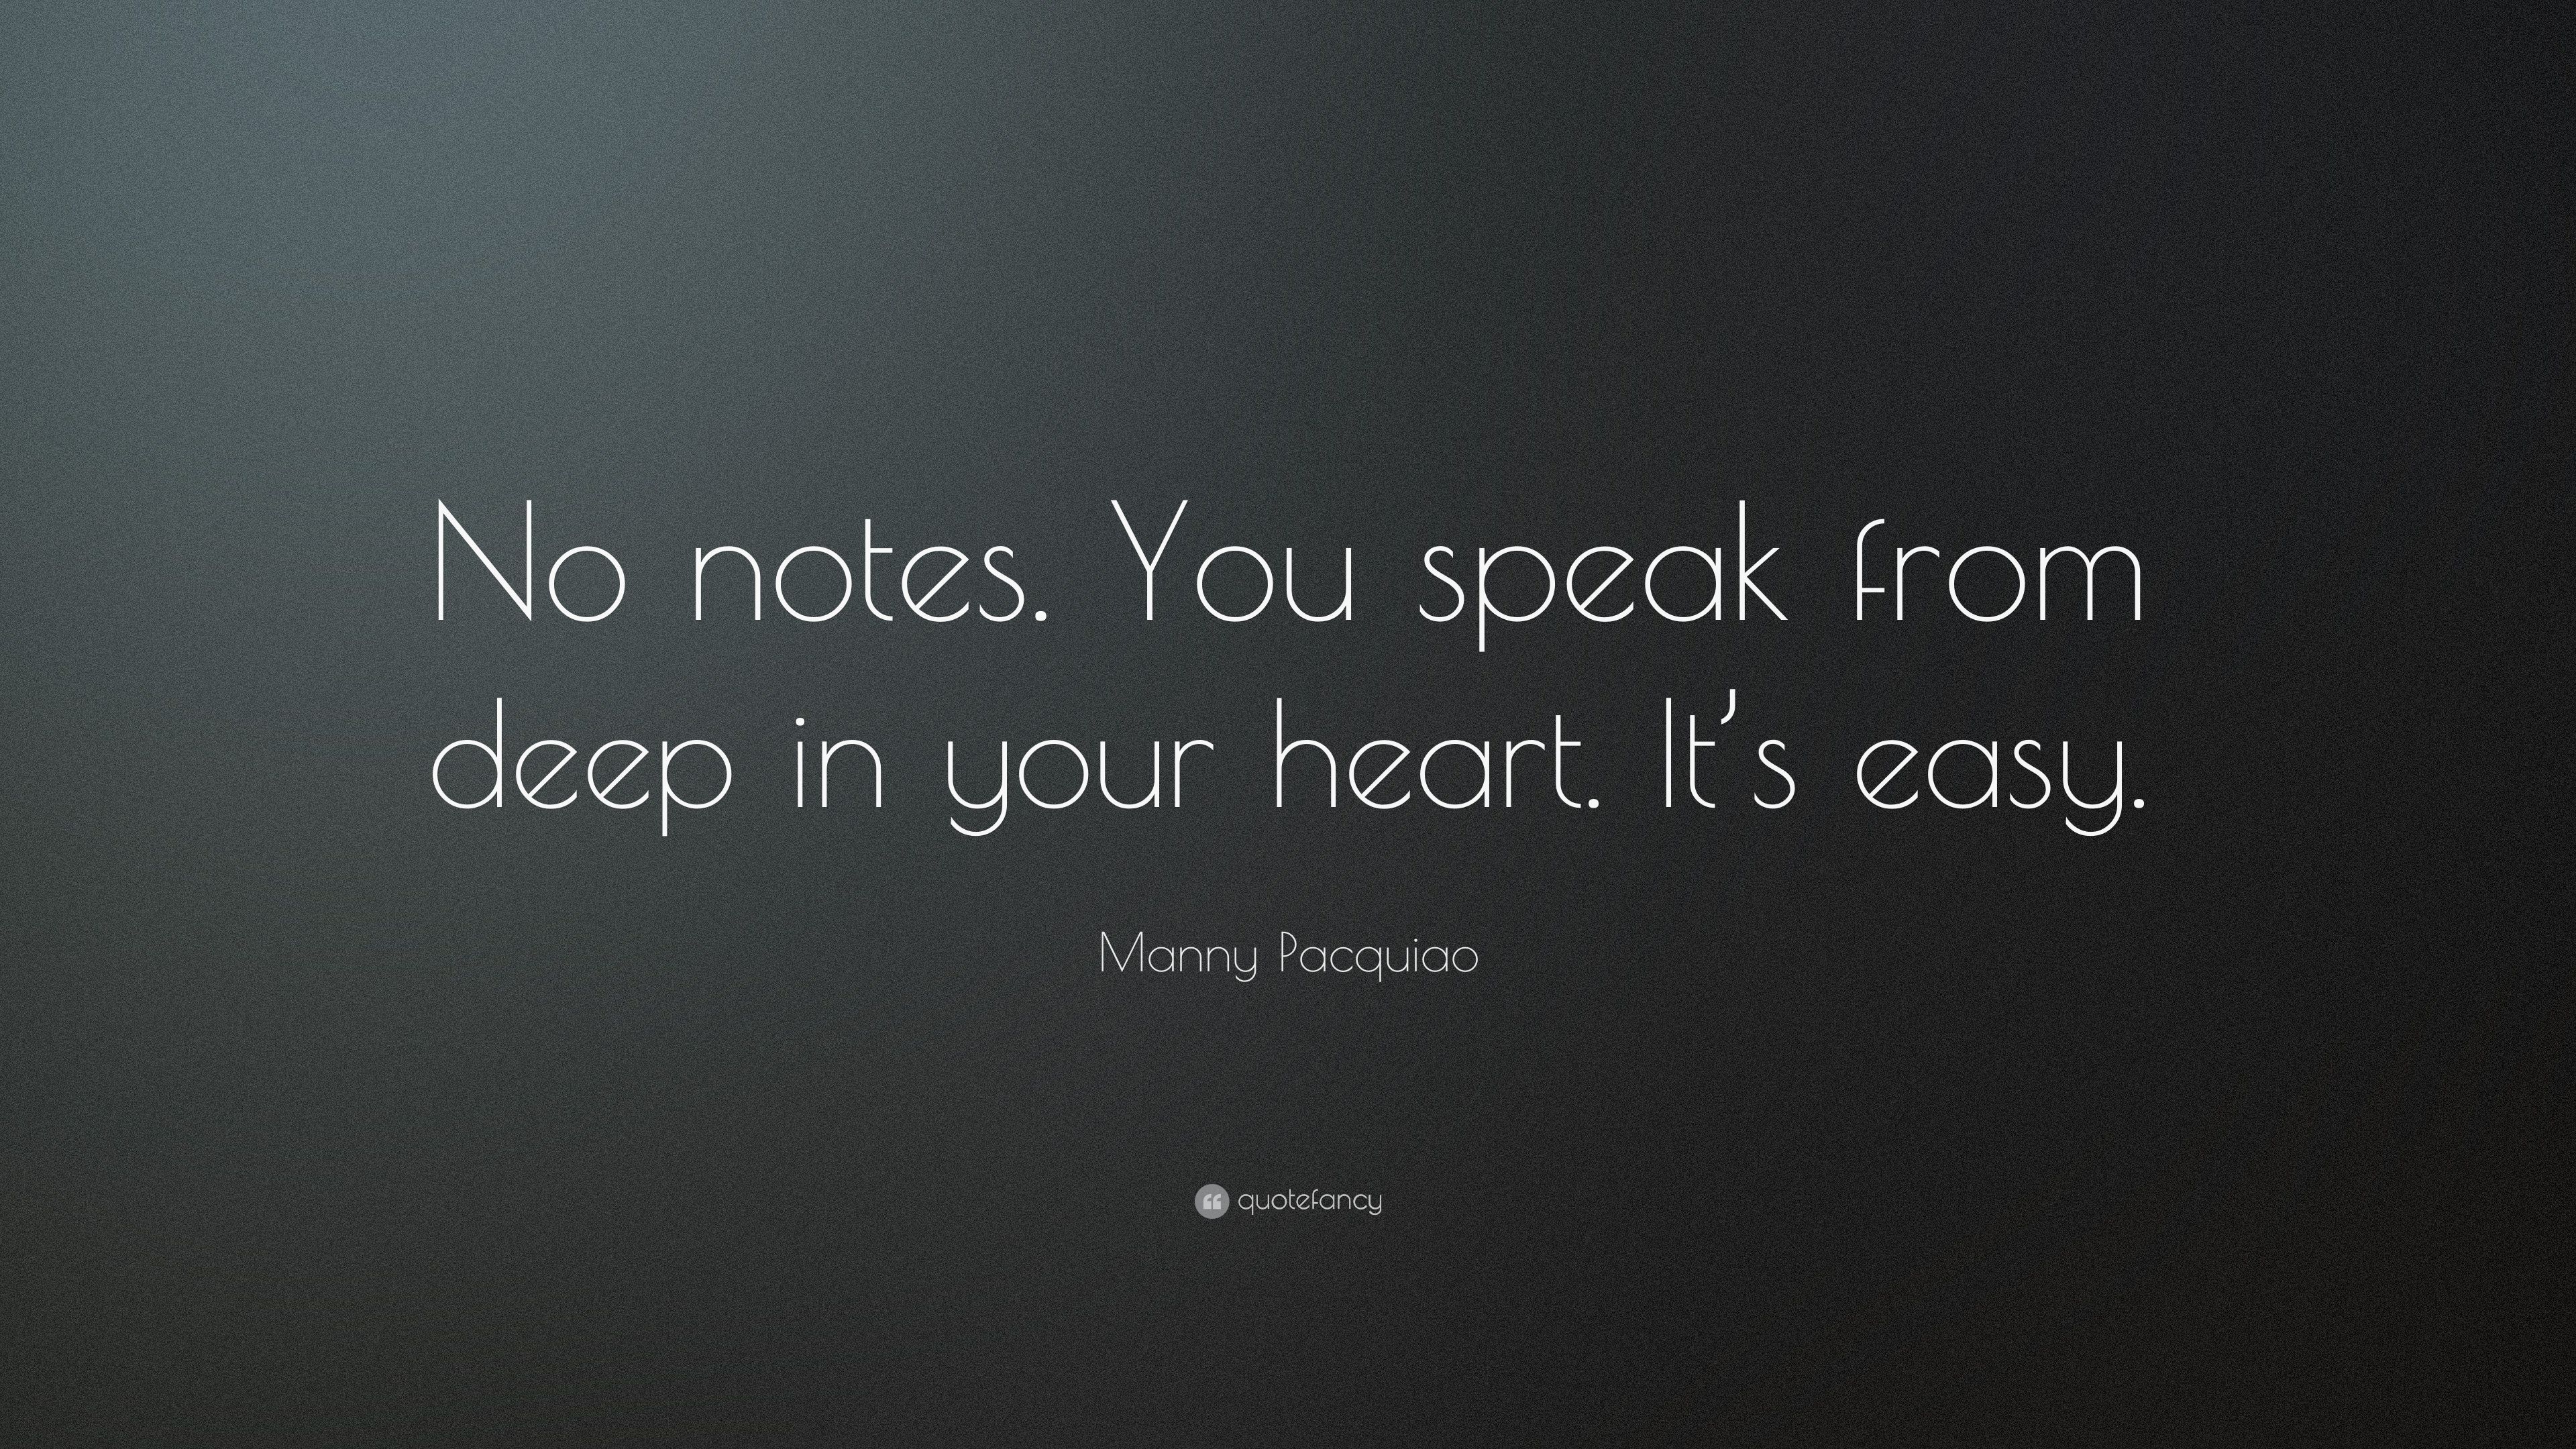 Manny Pacquiao Quote No notes. You speak from deep in your heart